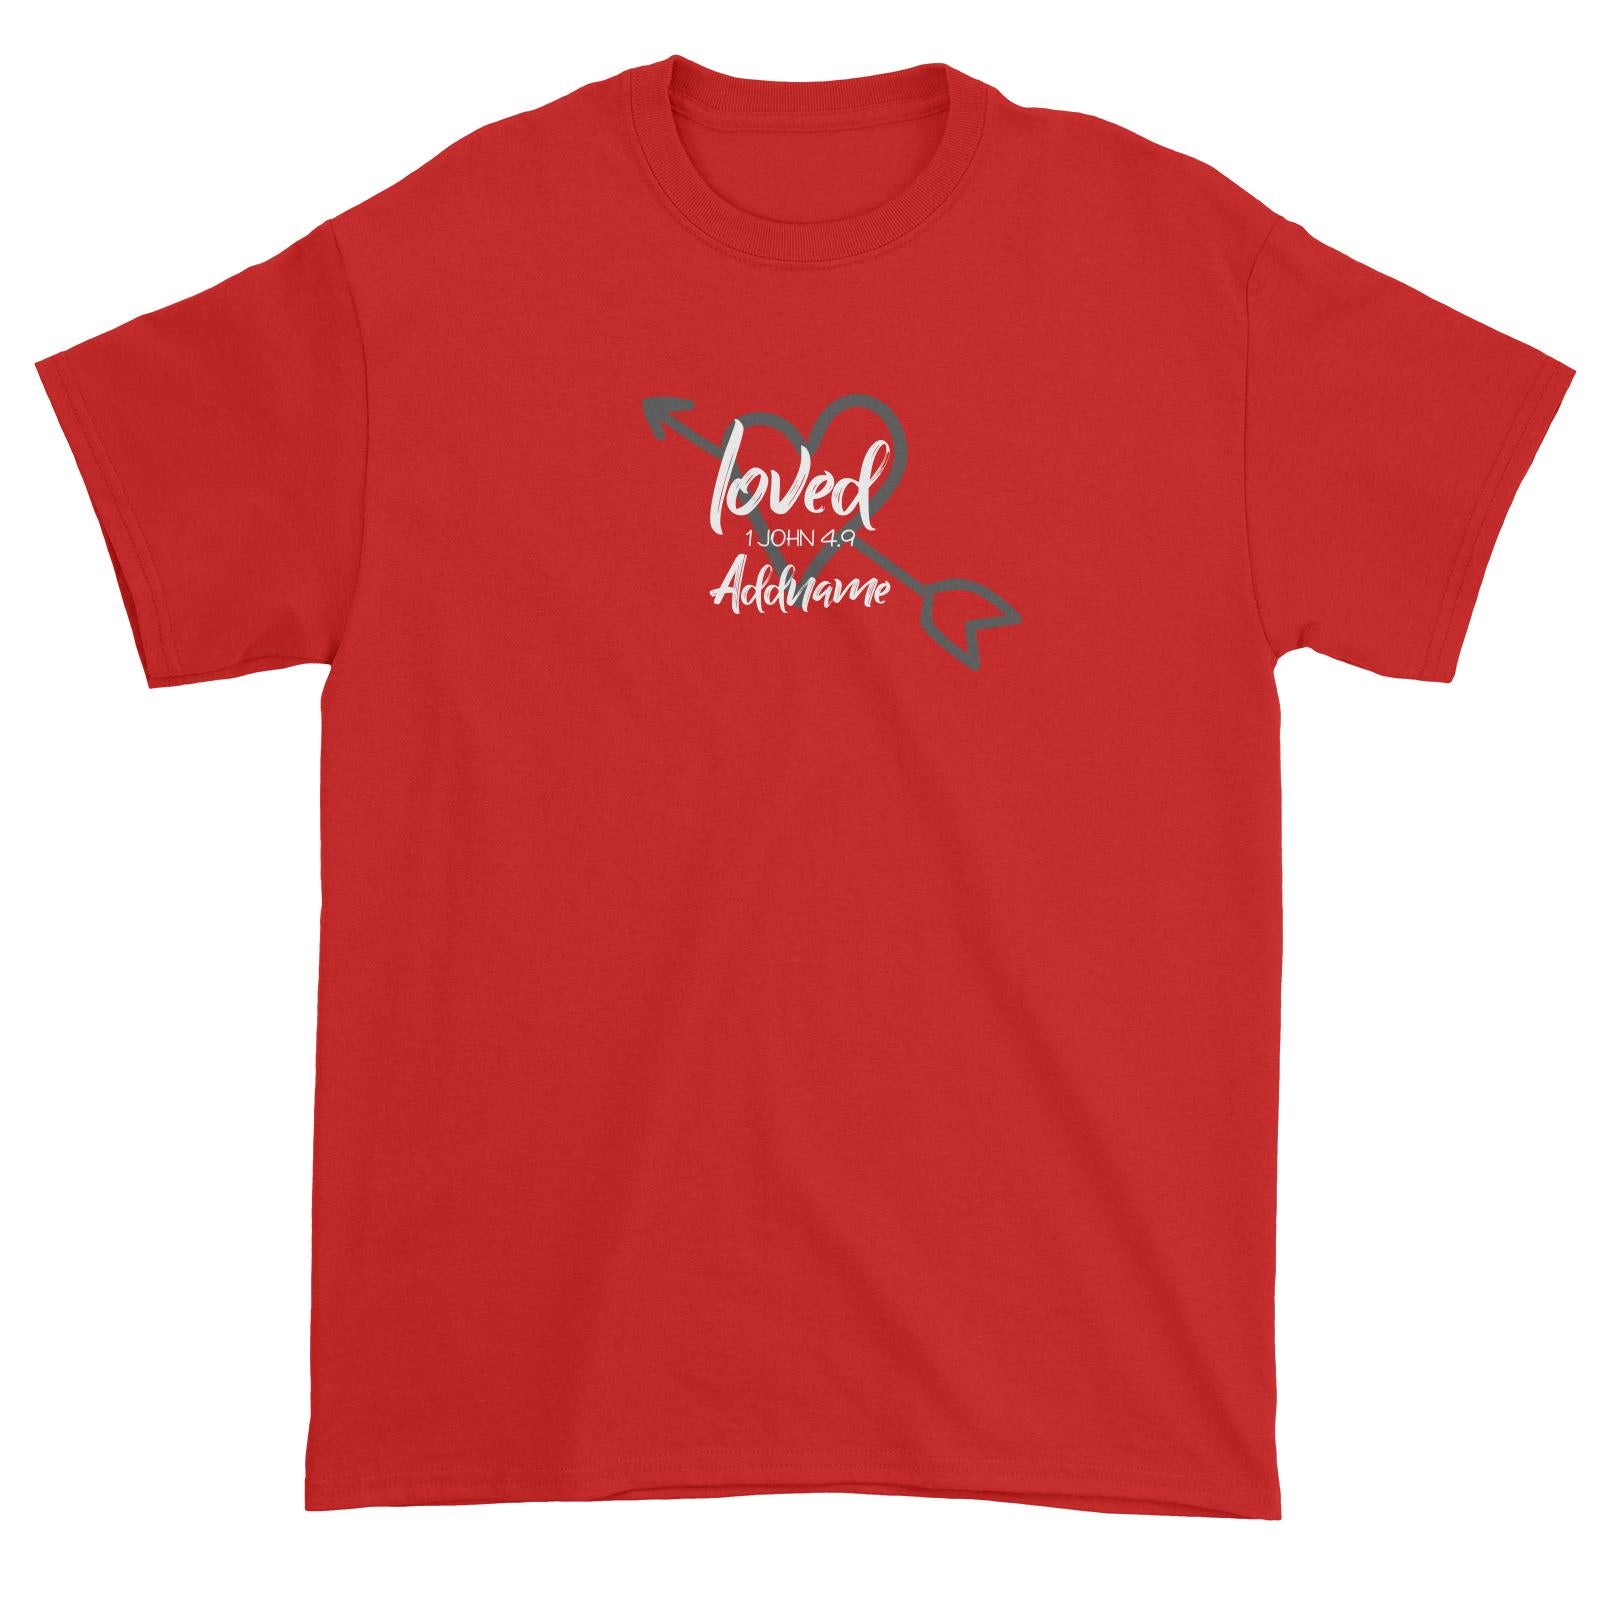 Loved Family Loved With Heart And Arrow 1 John 4.9 Addname Unisex T-Shirt